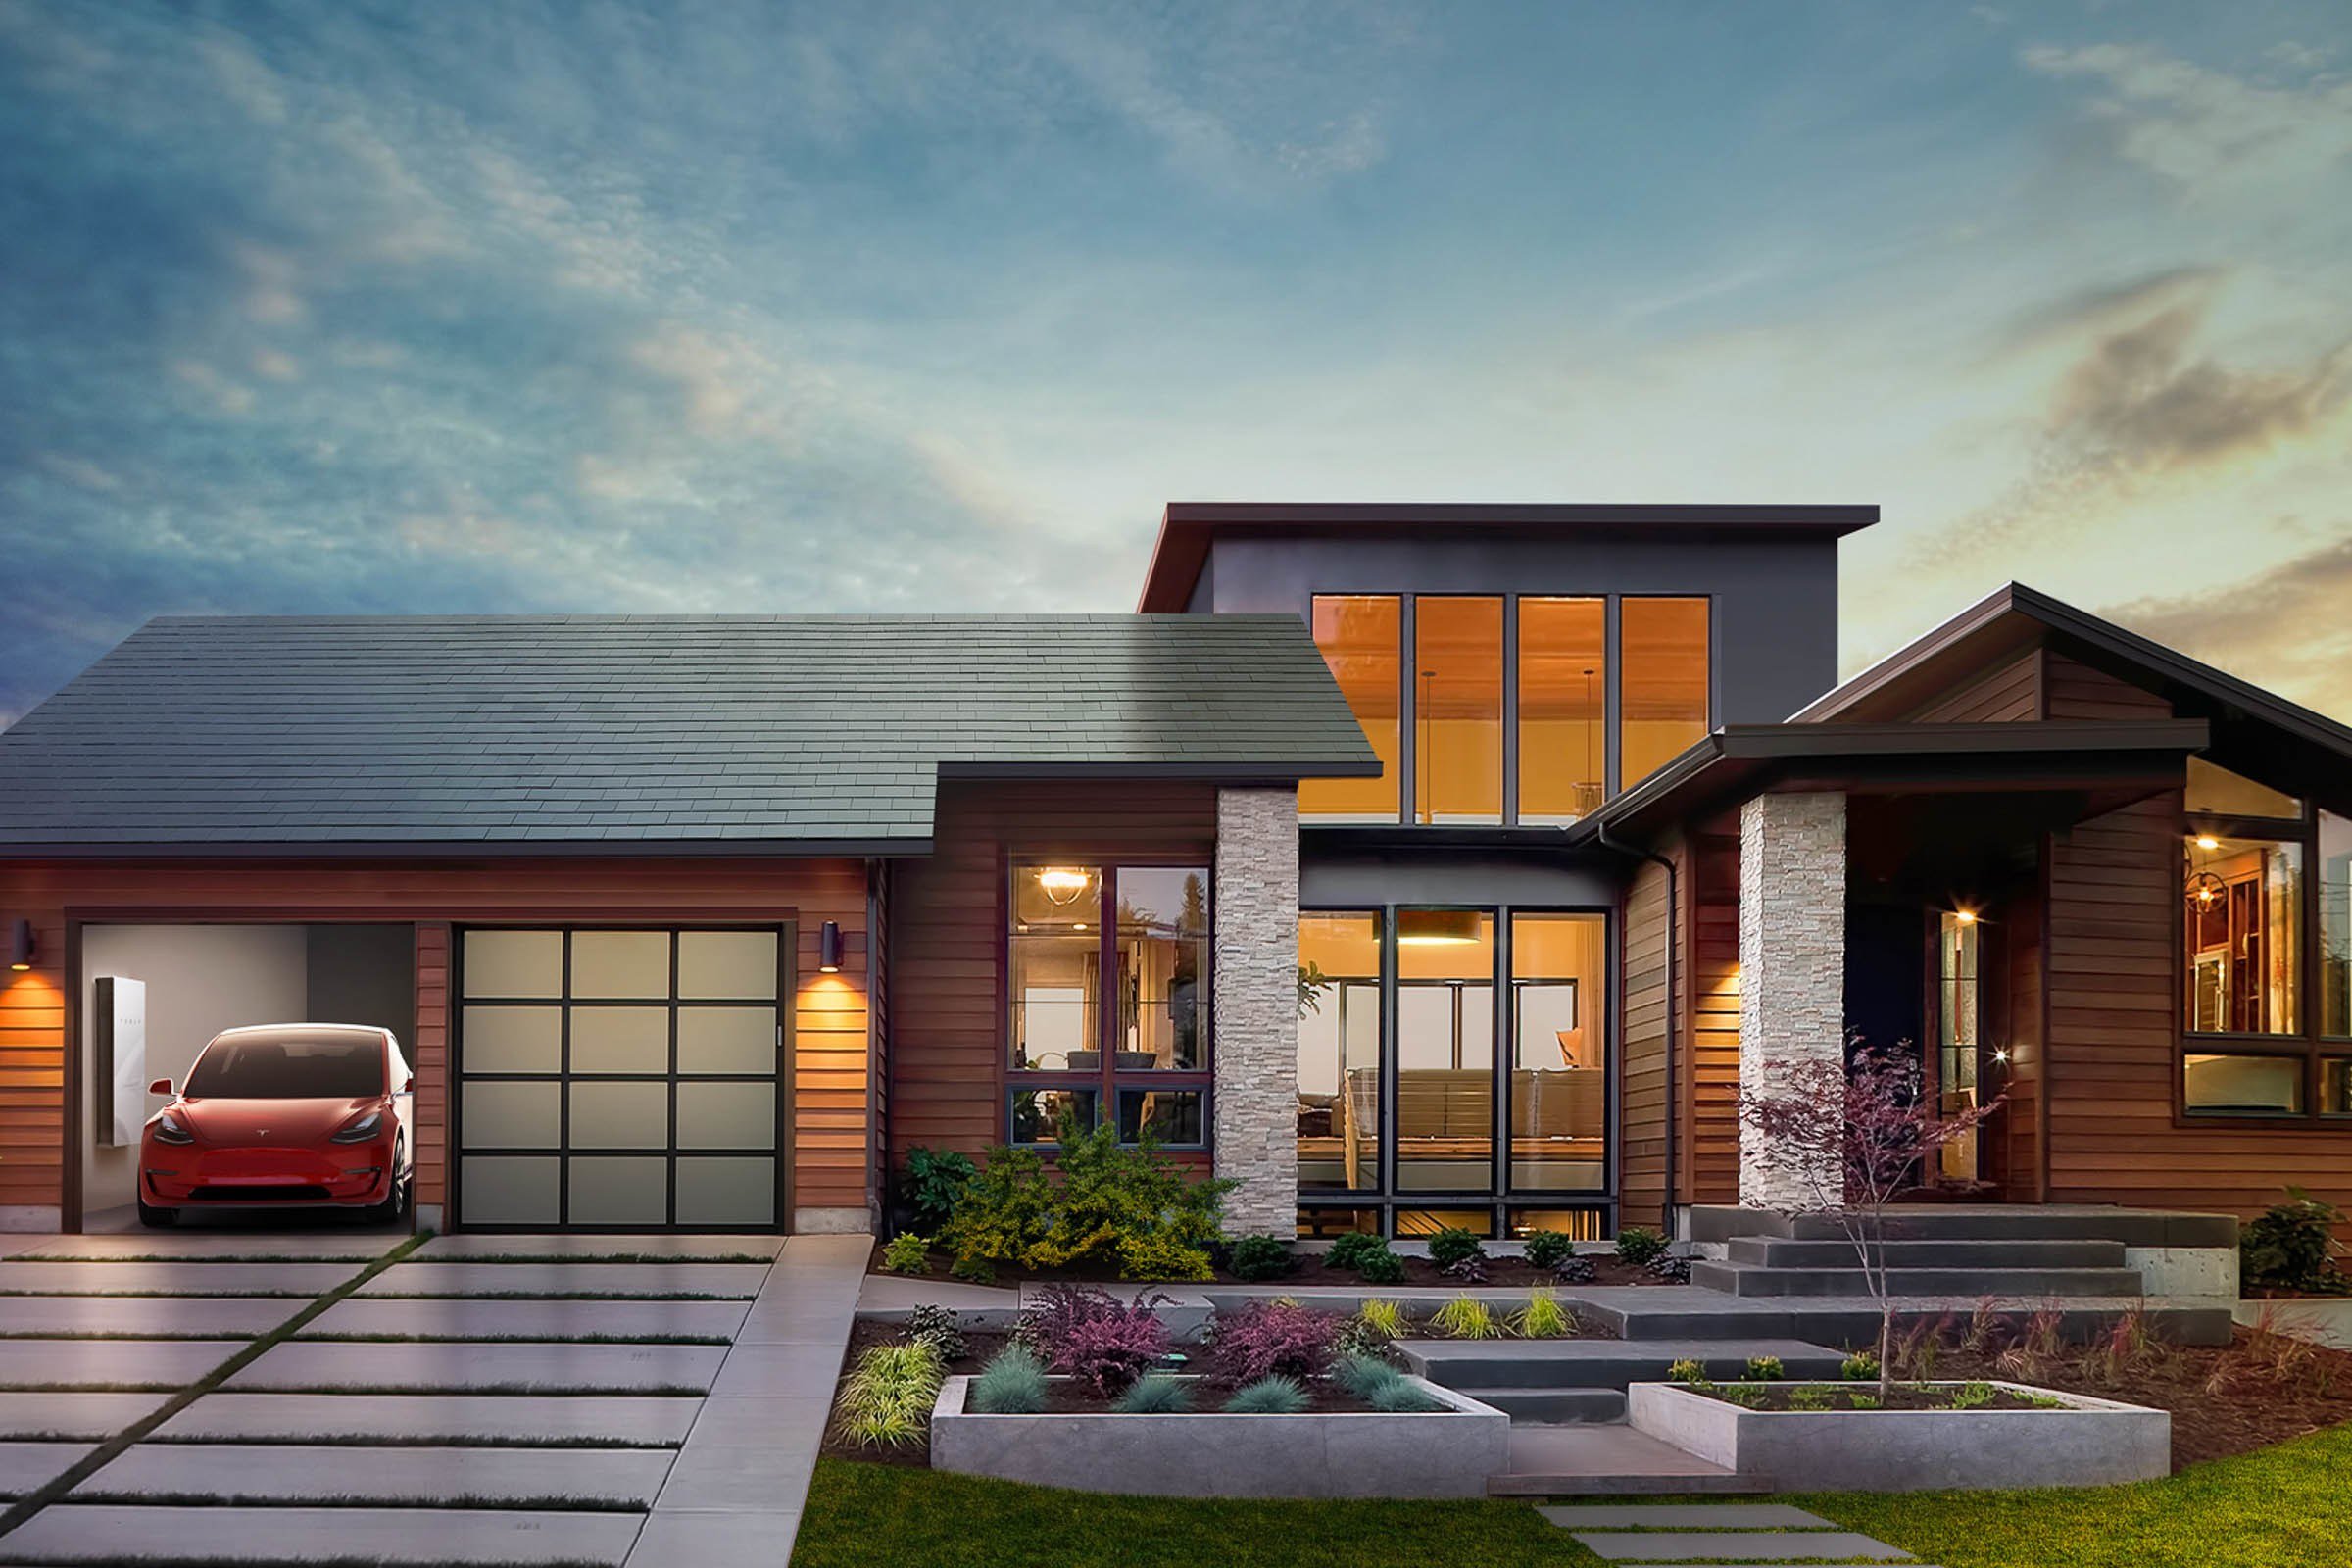 Tesla Pauses New Solar Roof Installations Due to Supply Chain Issues - TeslaNorth.com